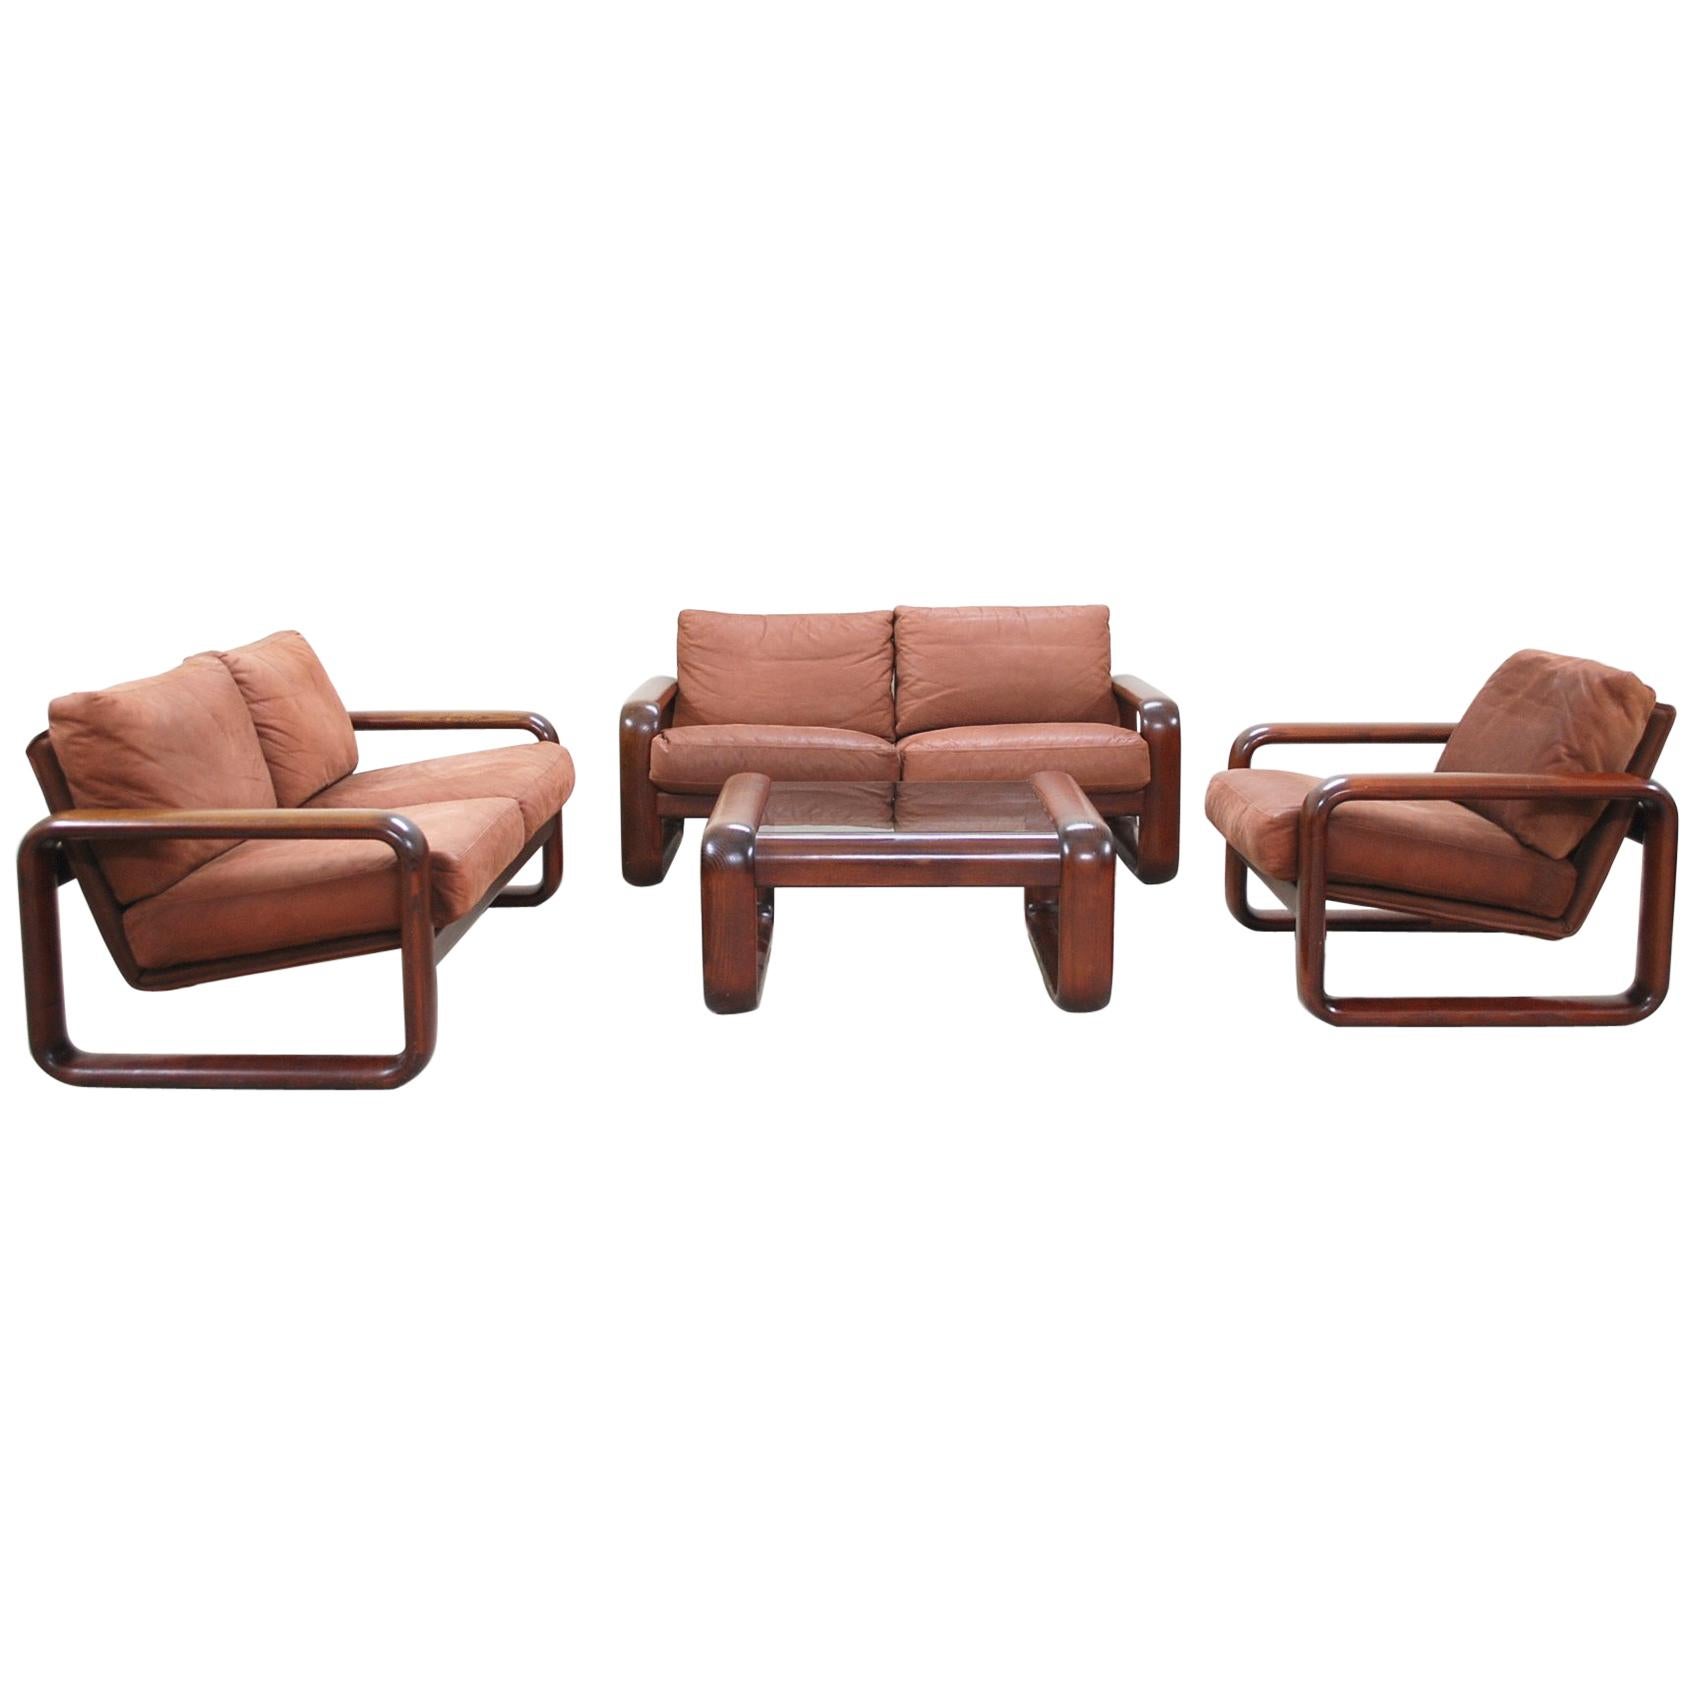 Rosenthal Model Hombre Living Suite Leather Sofa and Chair by Burkhart Vogtherr